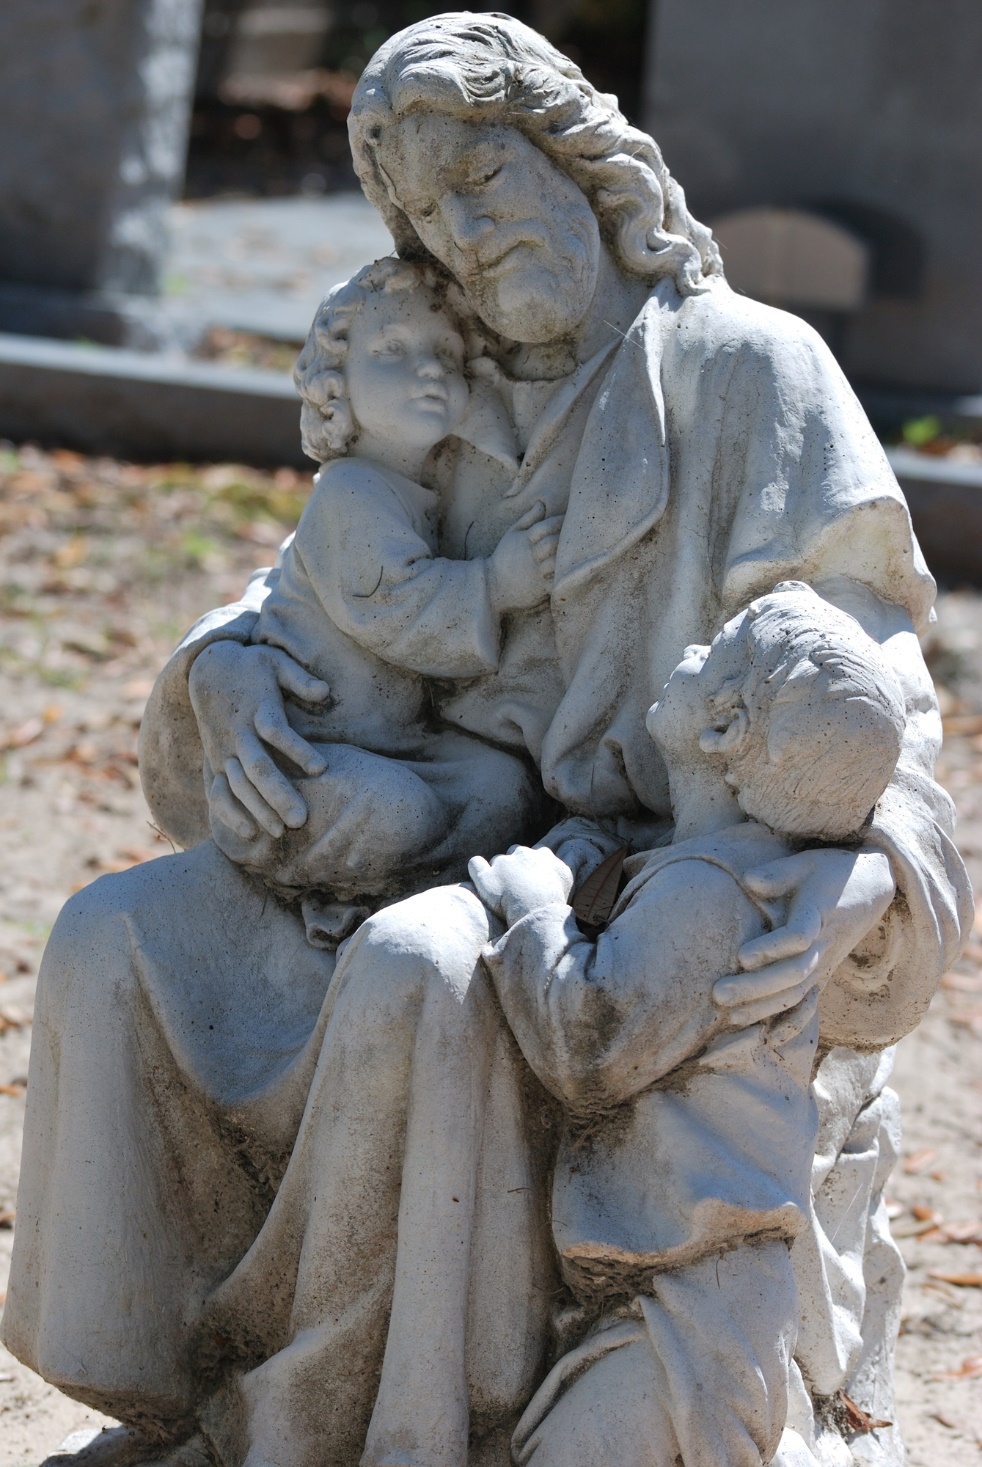 A statue of a person holding a baby

Description automatically generated with medium confidence